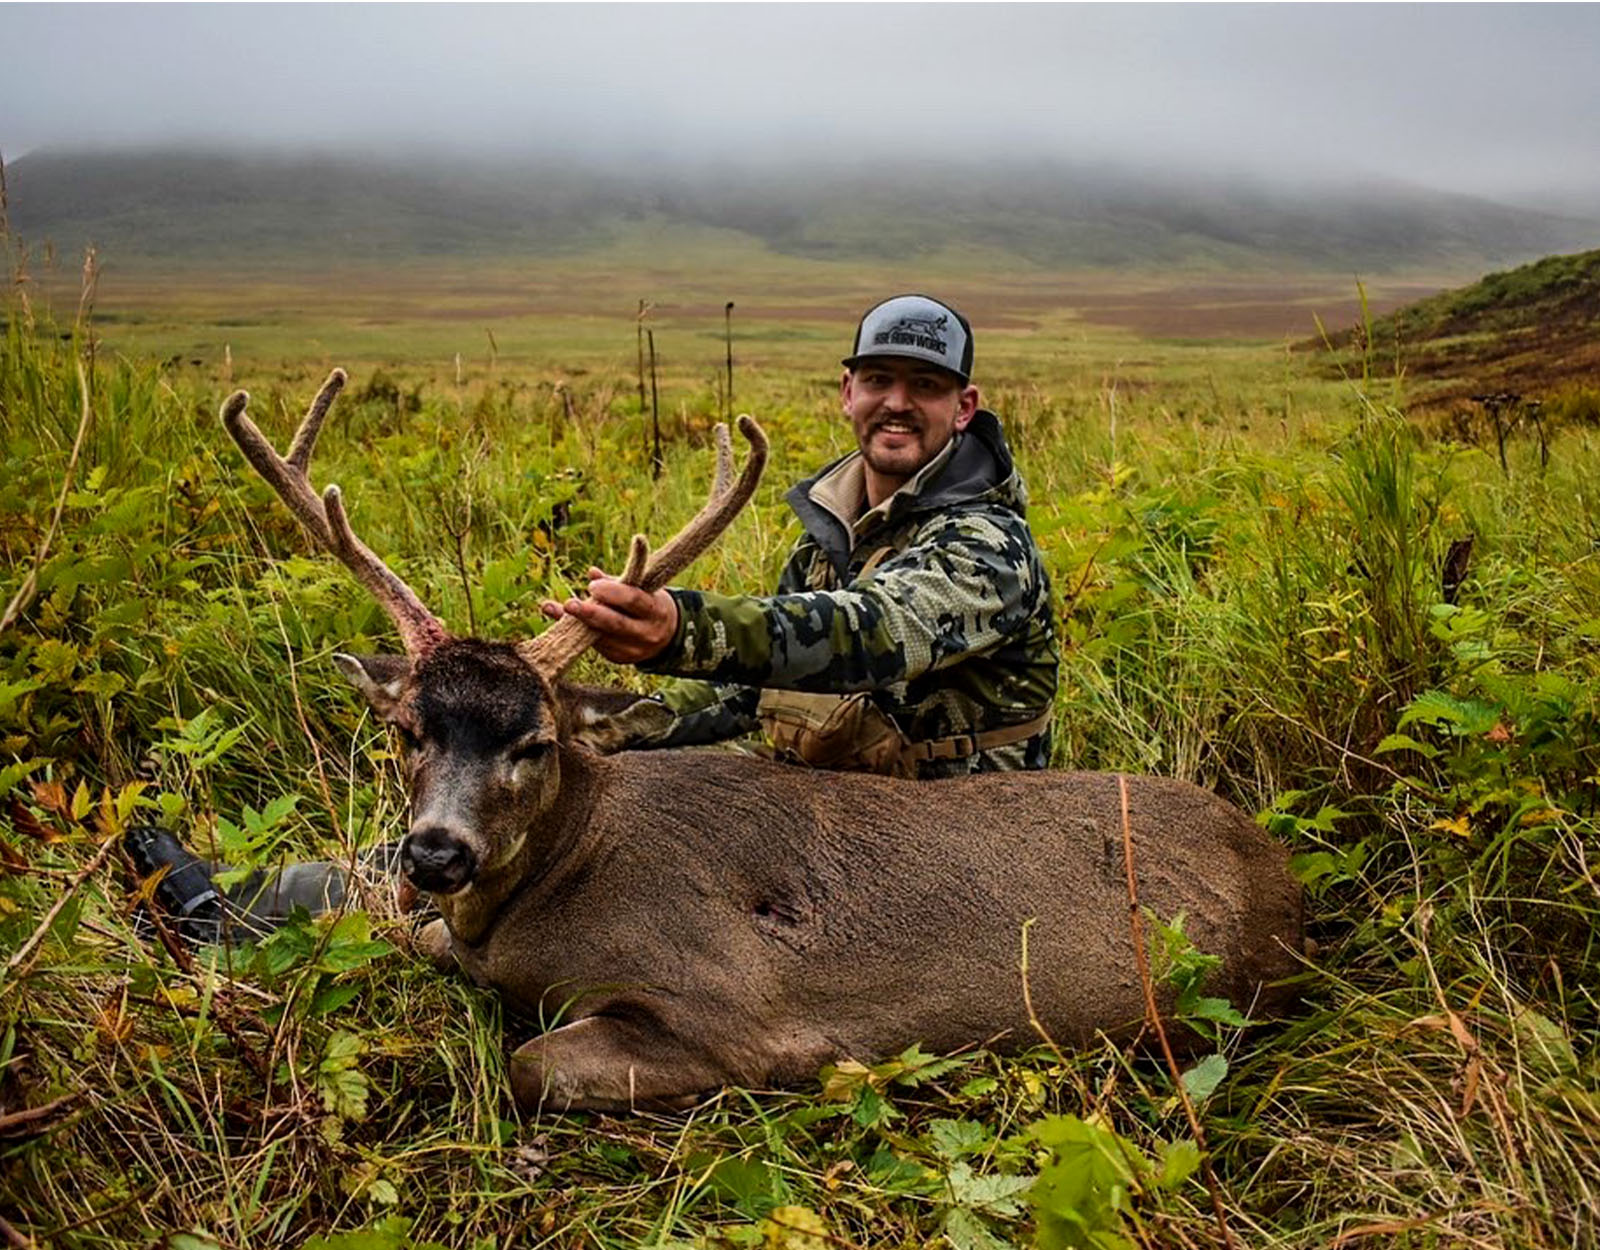 A hunter with the blacktail deer he harvested.